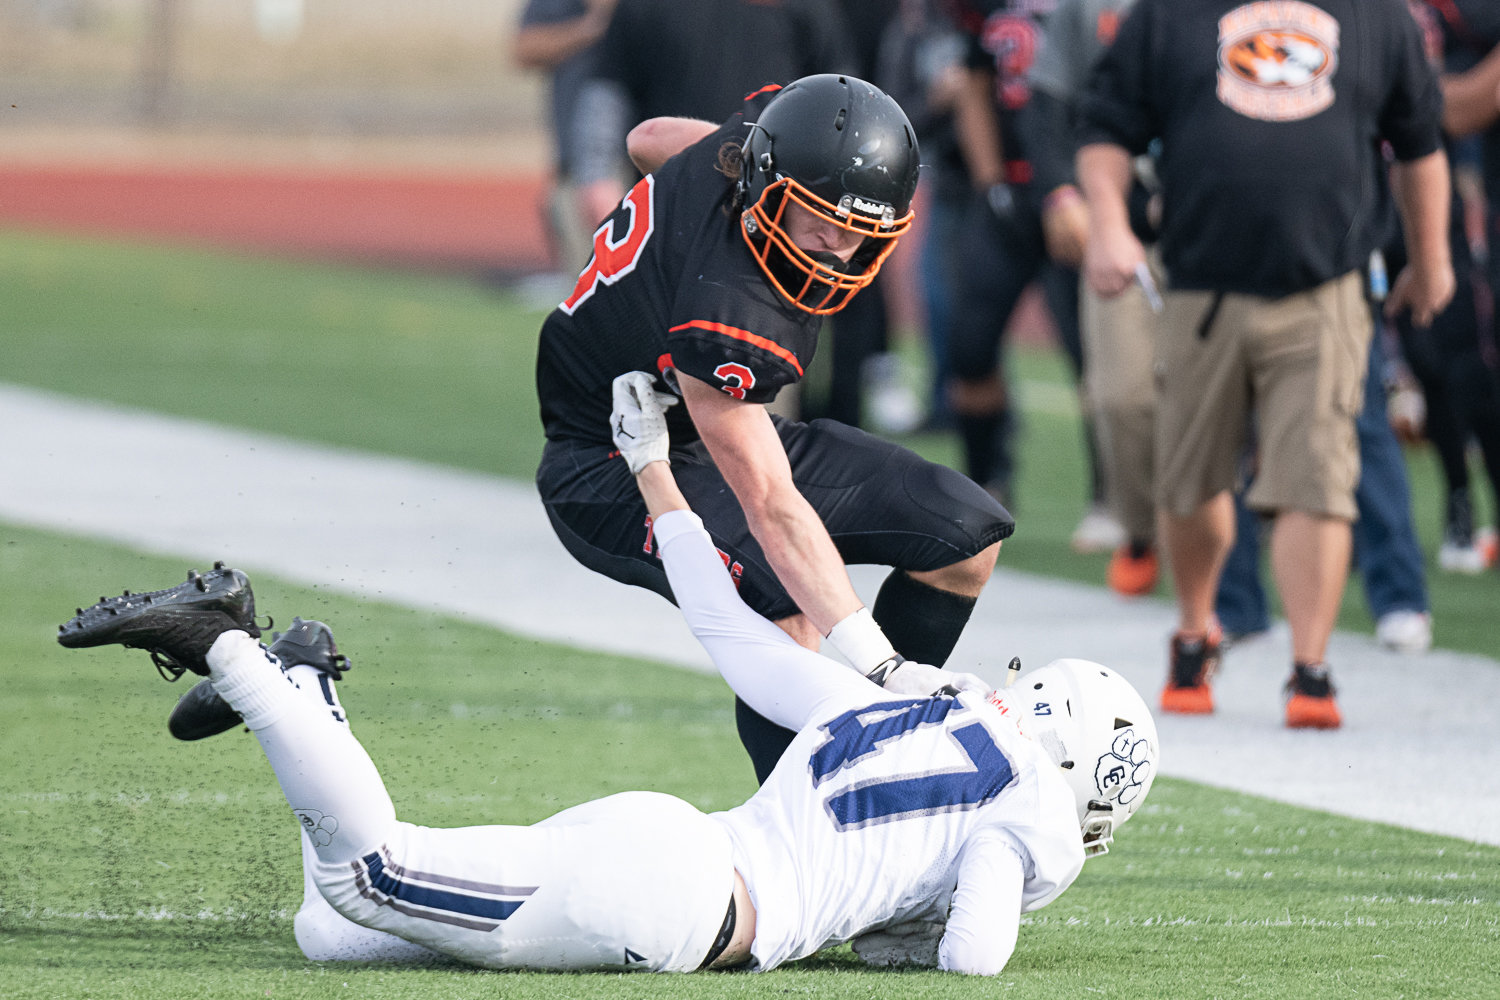 Napavine receiver Max O'Neill stiff arms a Cascade Christian defender to the ground in the Tigers win at Centralia Tiger Stadium Oct. 29.